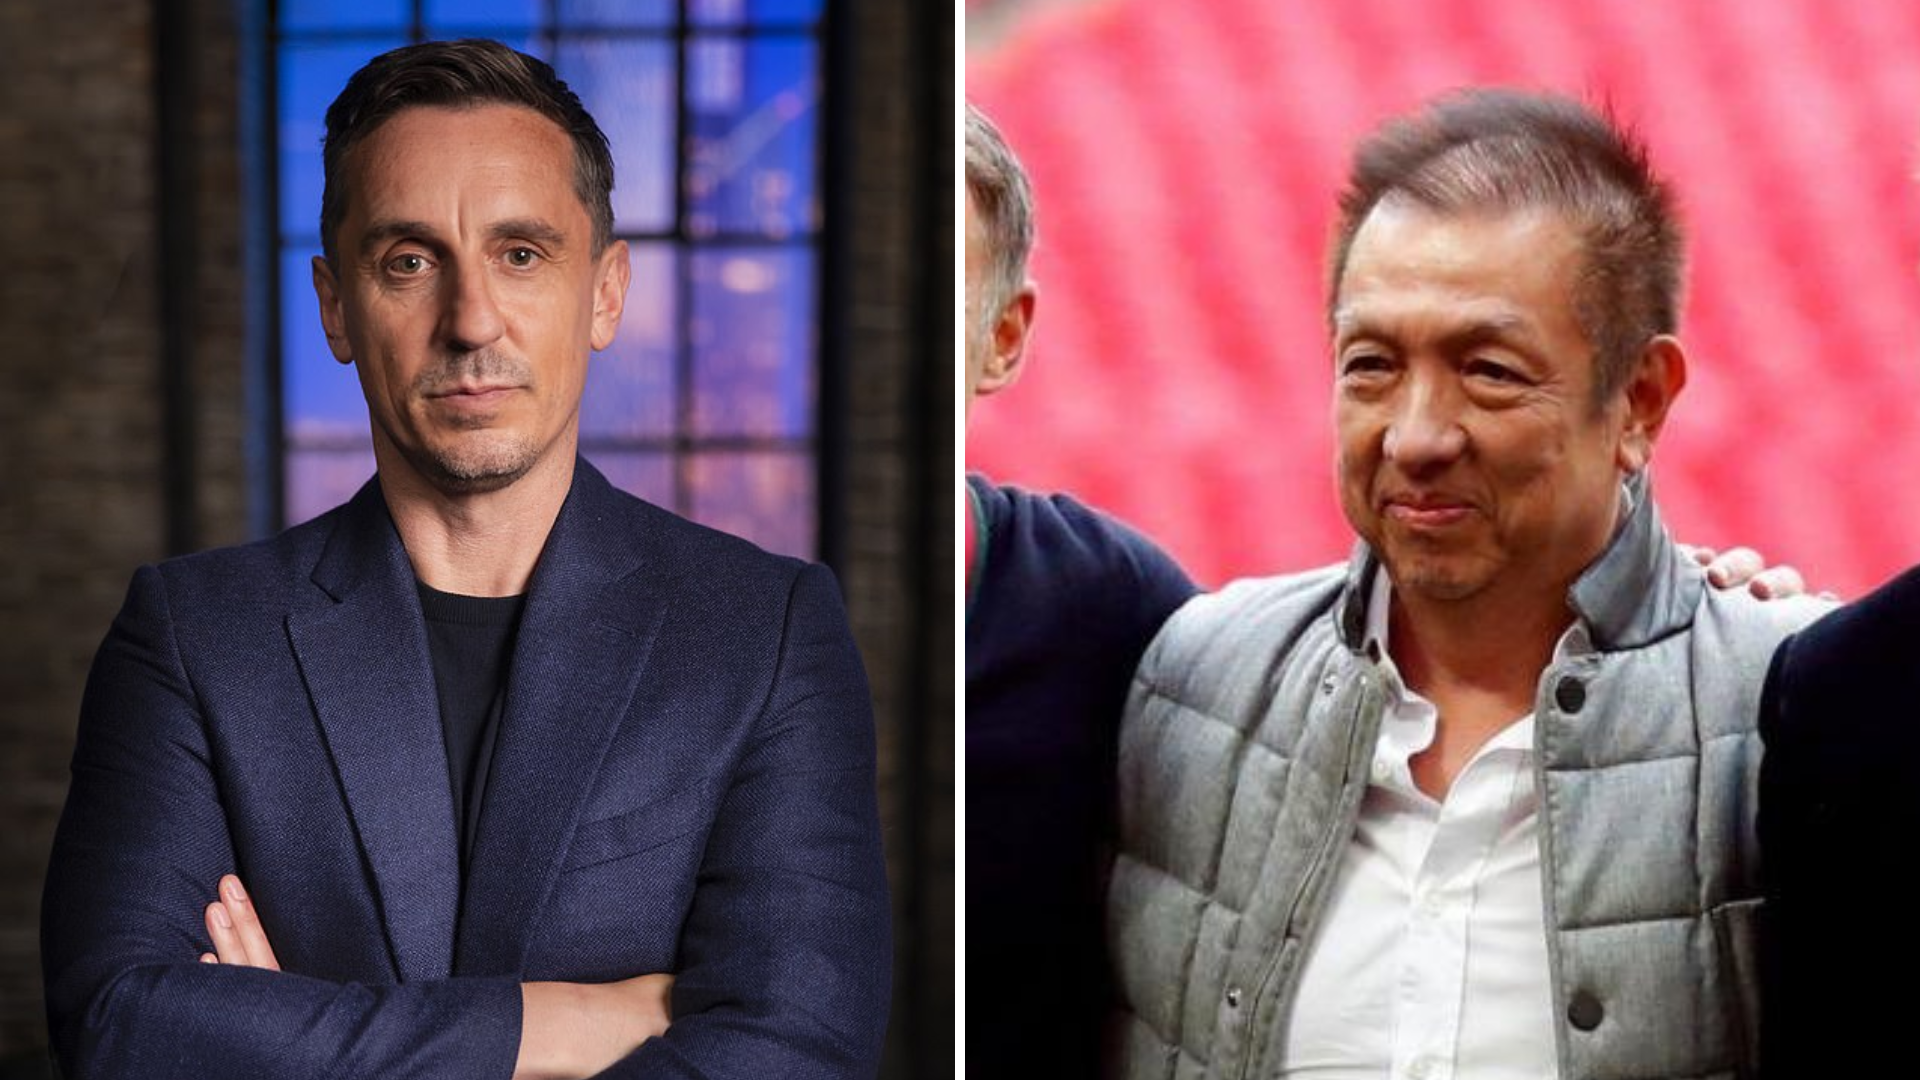 Gary Neville buys out Lim to become Salford City's majority shareholder